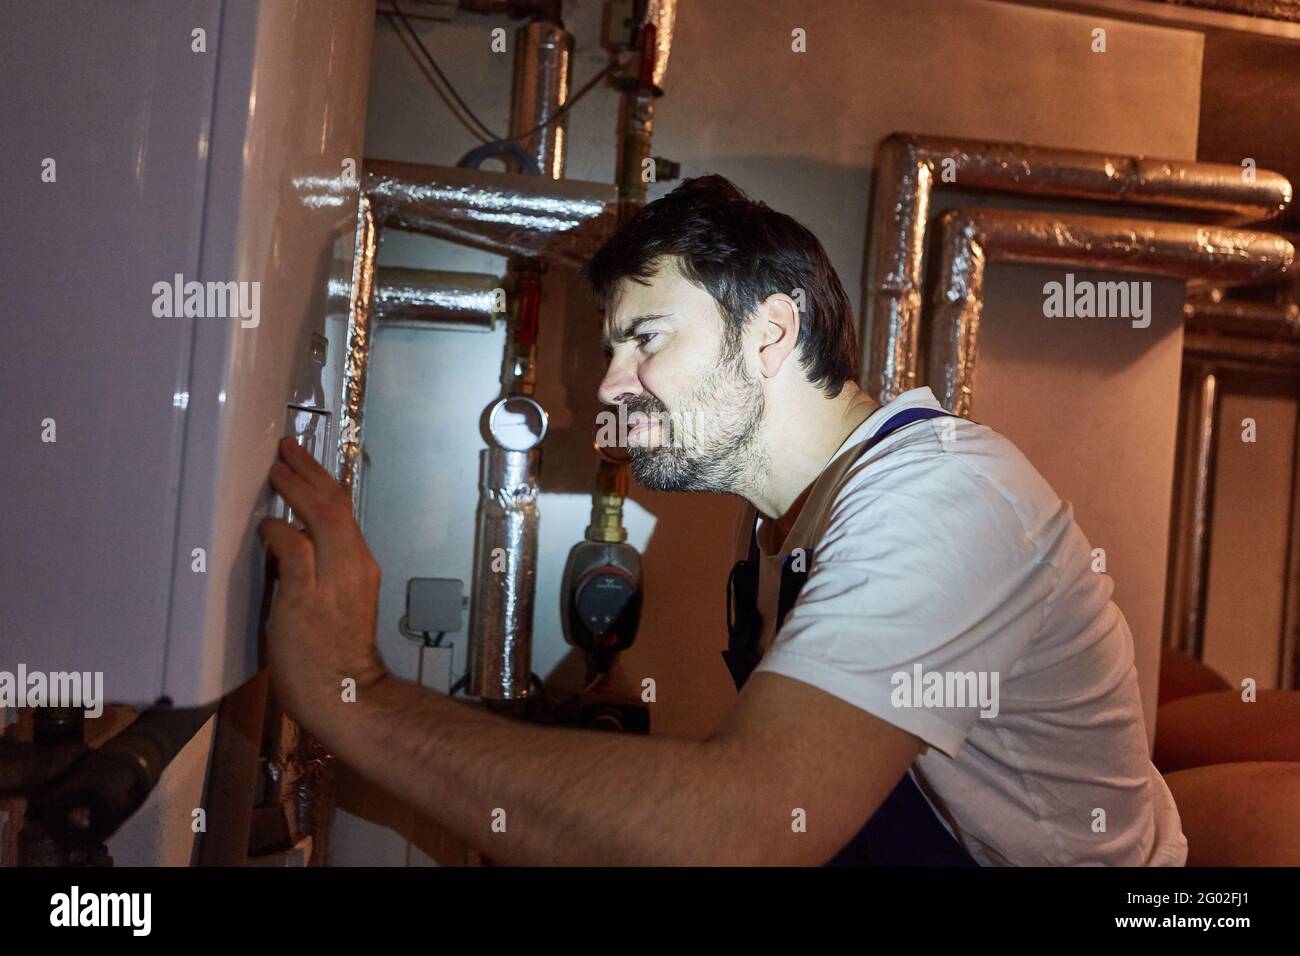 Installer checks the installation of the gas boiler in the basement during heating maintenance Stock Photo